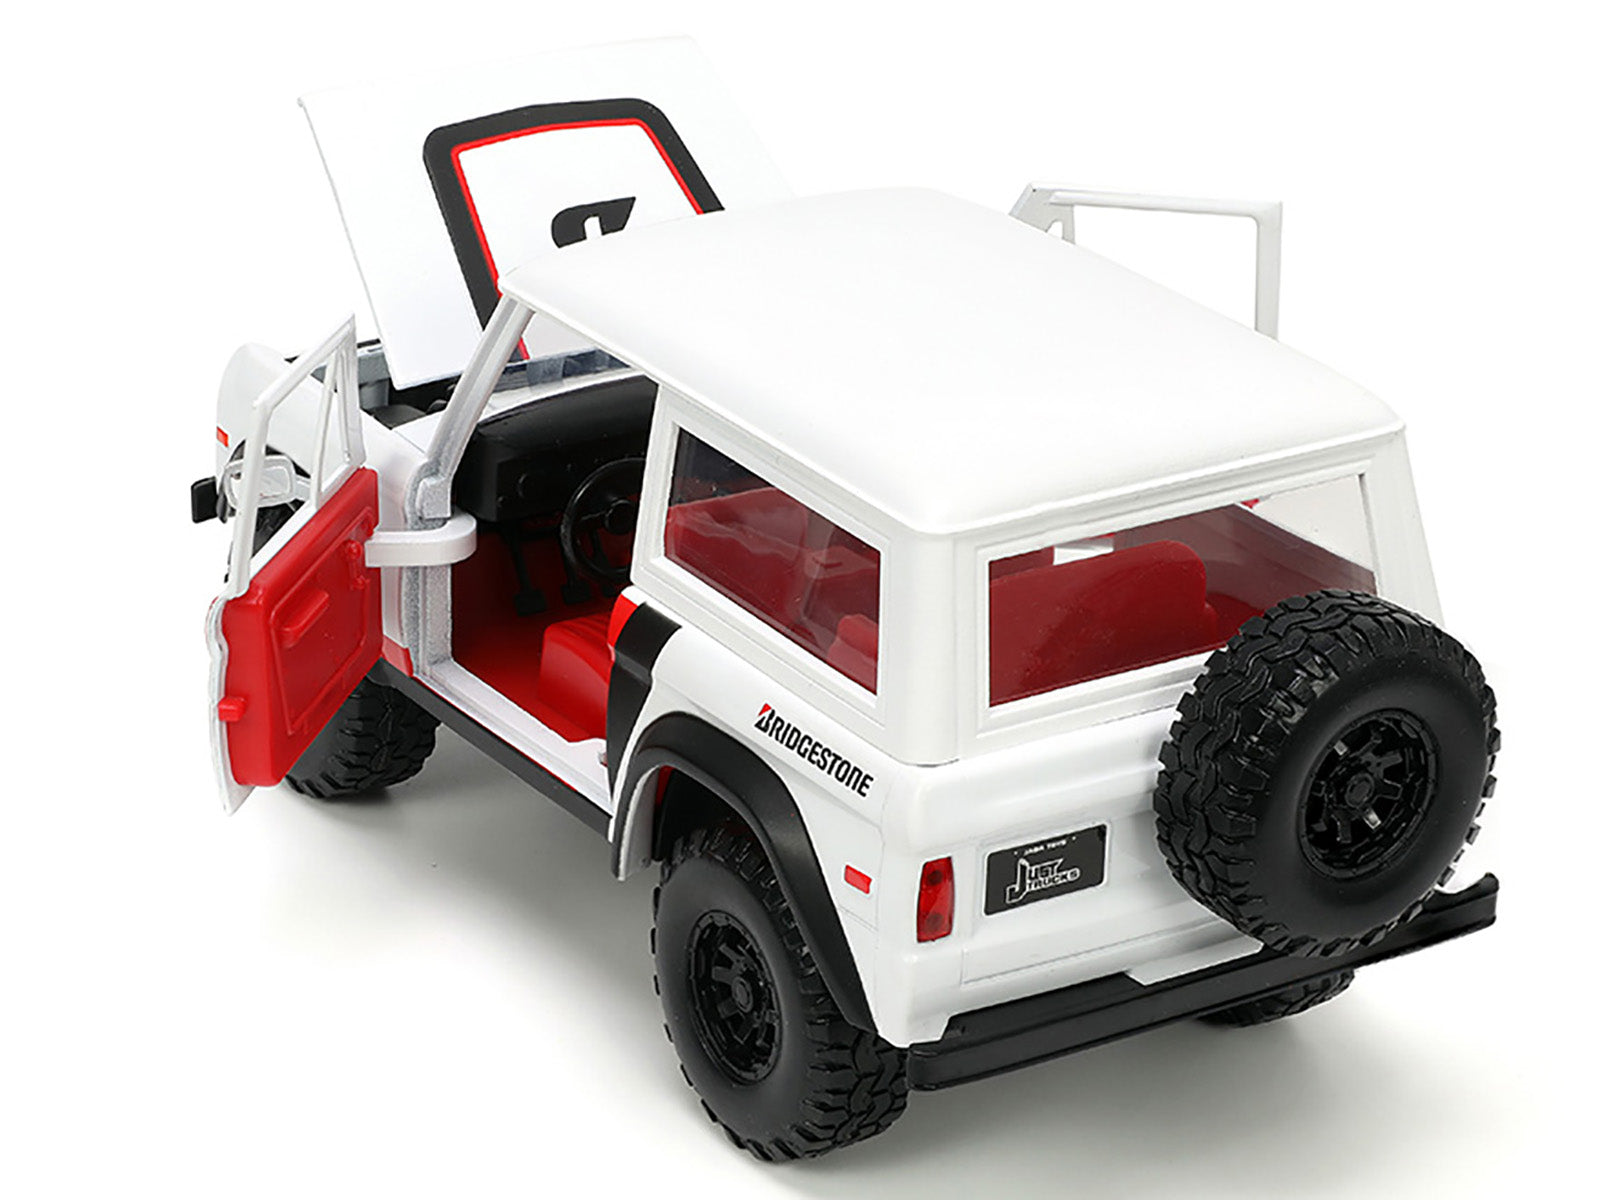 1973 Ford Bronco #008 White with Red and Black Stripes and Red Interior with Extra Wheels "Just Trucks" Series 1/24 Diecast Model Car by Jada